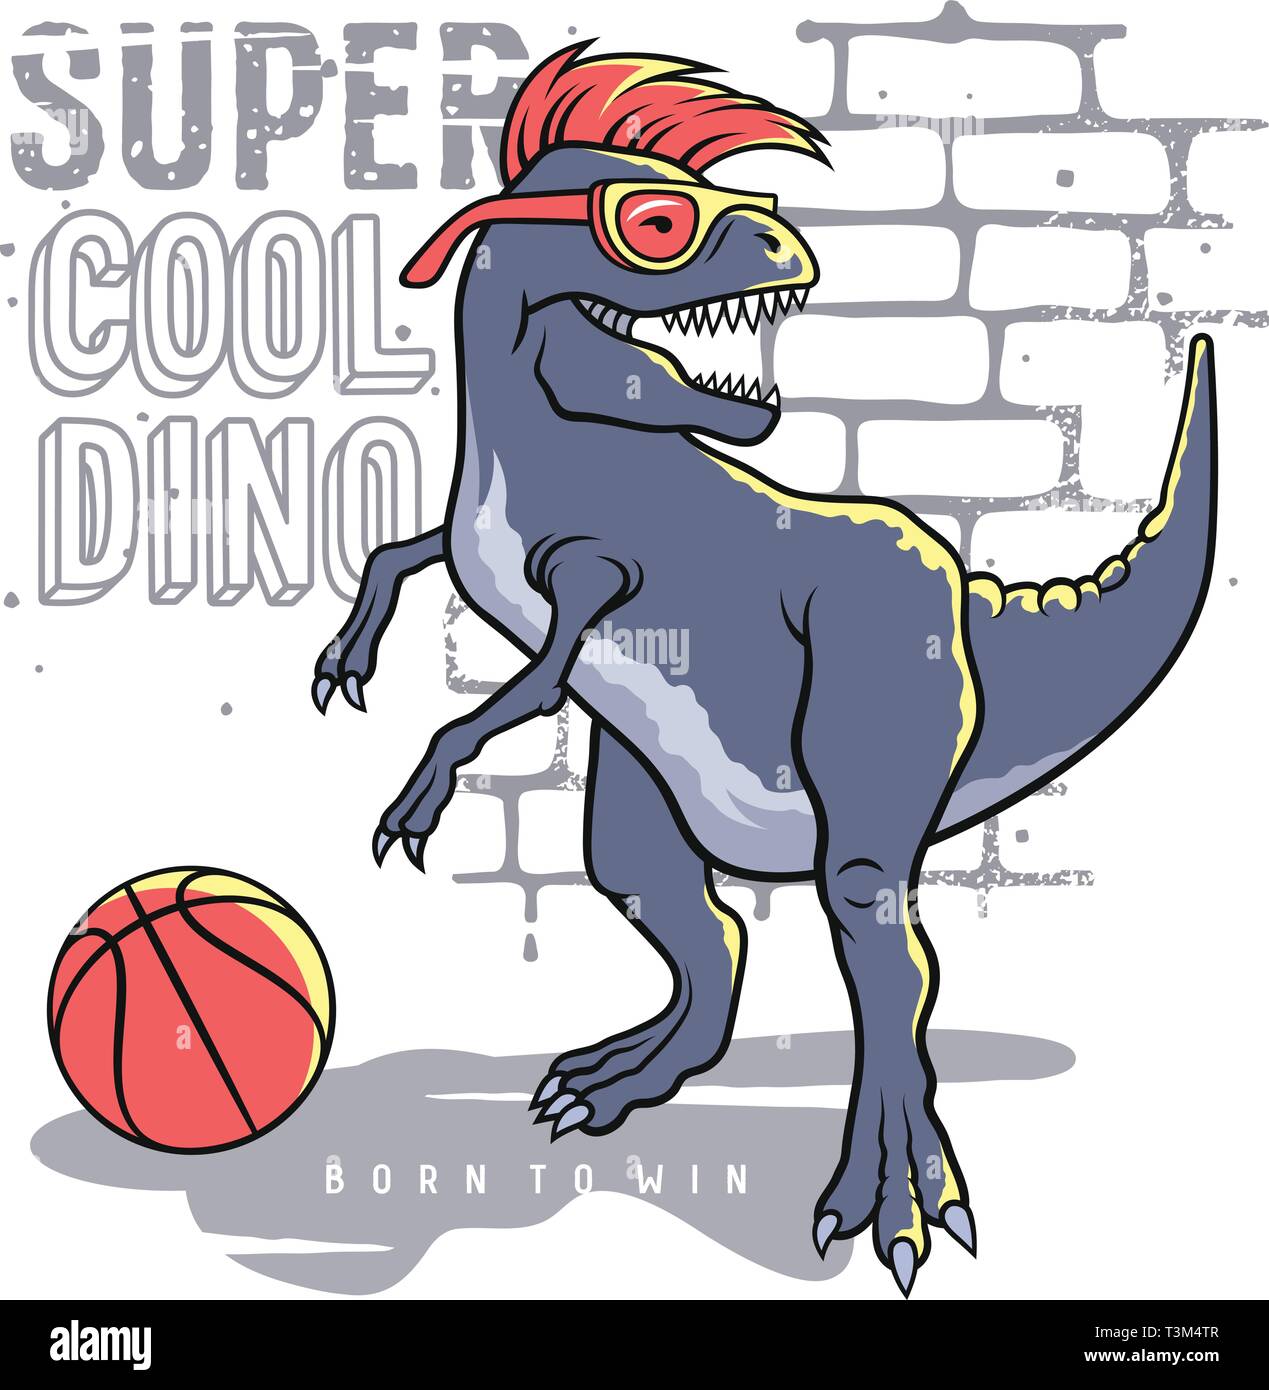 Dinosaur and slogan typography for t shirt design. Tyrannosaur Rex playing basketball on the background of brick wall. Athletic graphic tee. Vectors Stock Vector